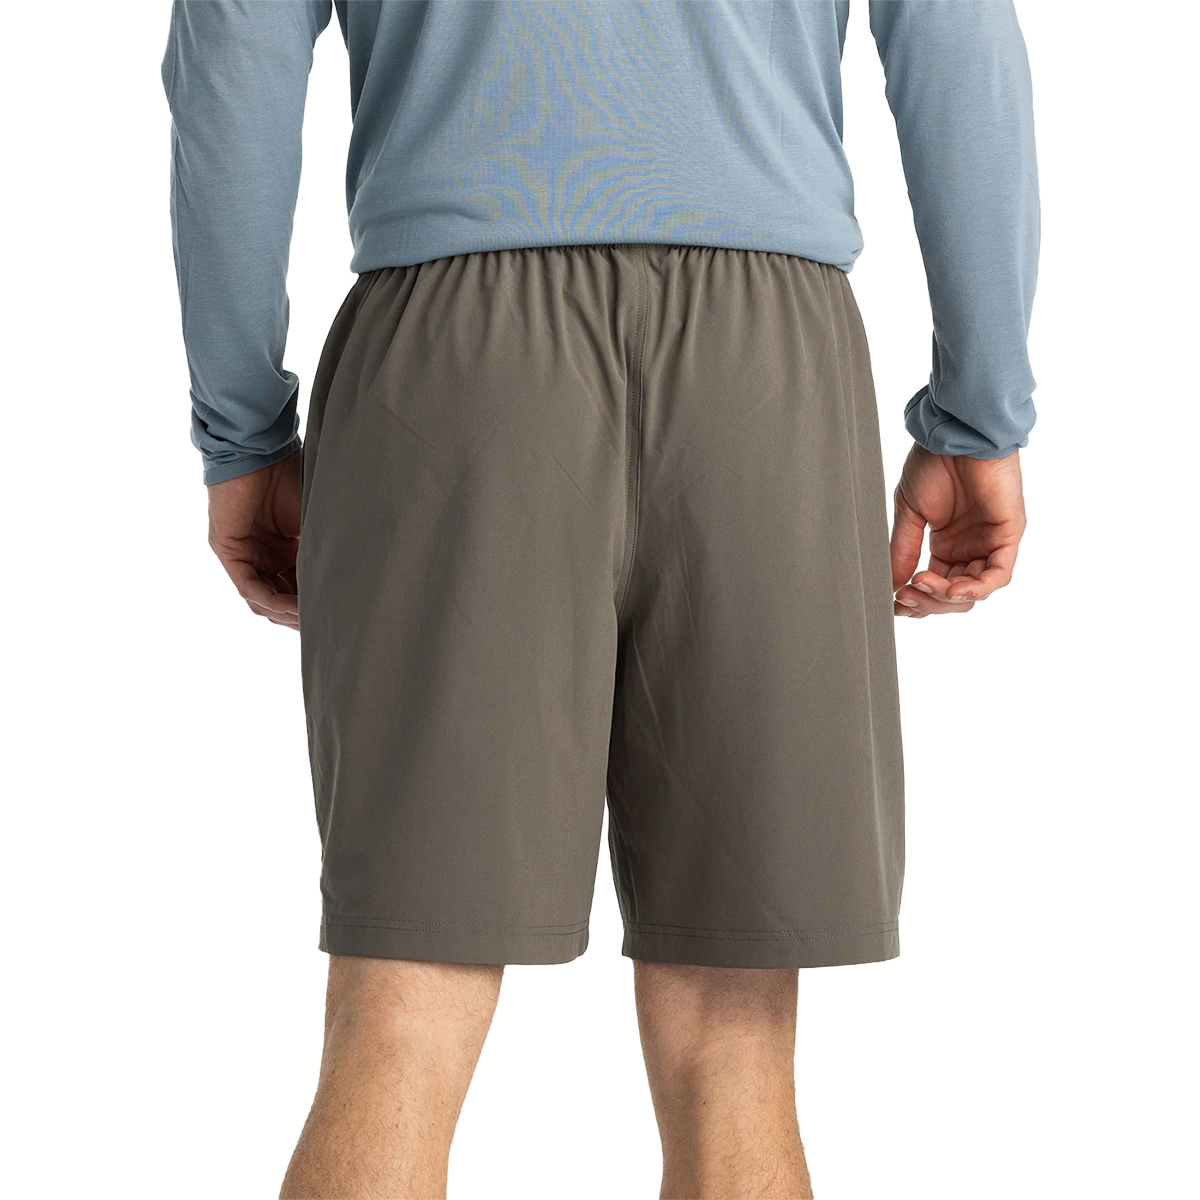 Free Fly Breeze Short 8", , large image number null